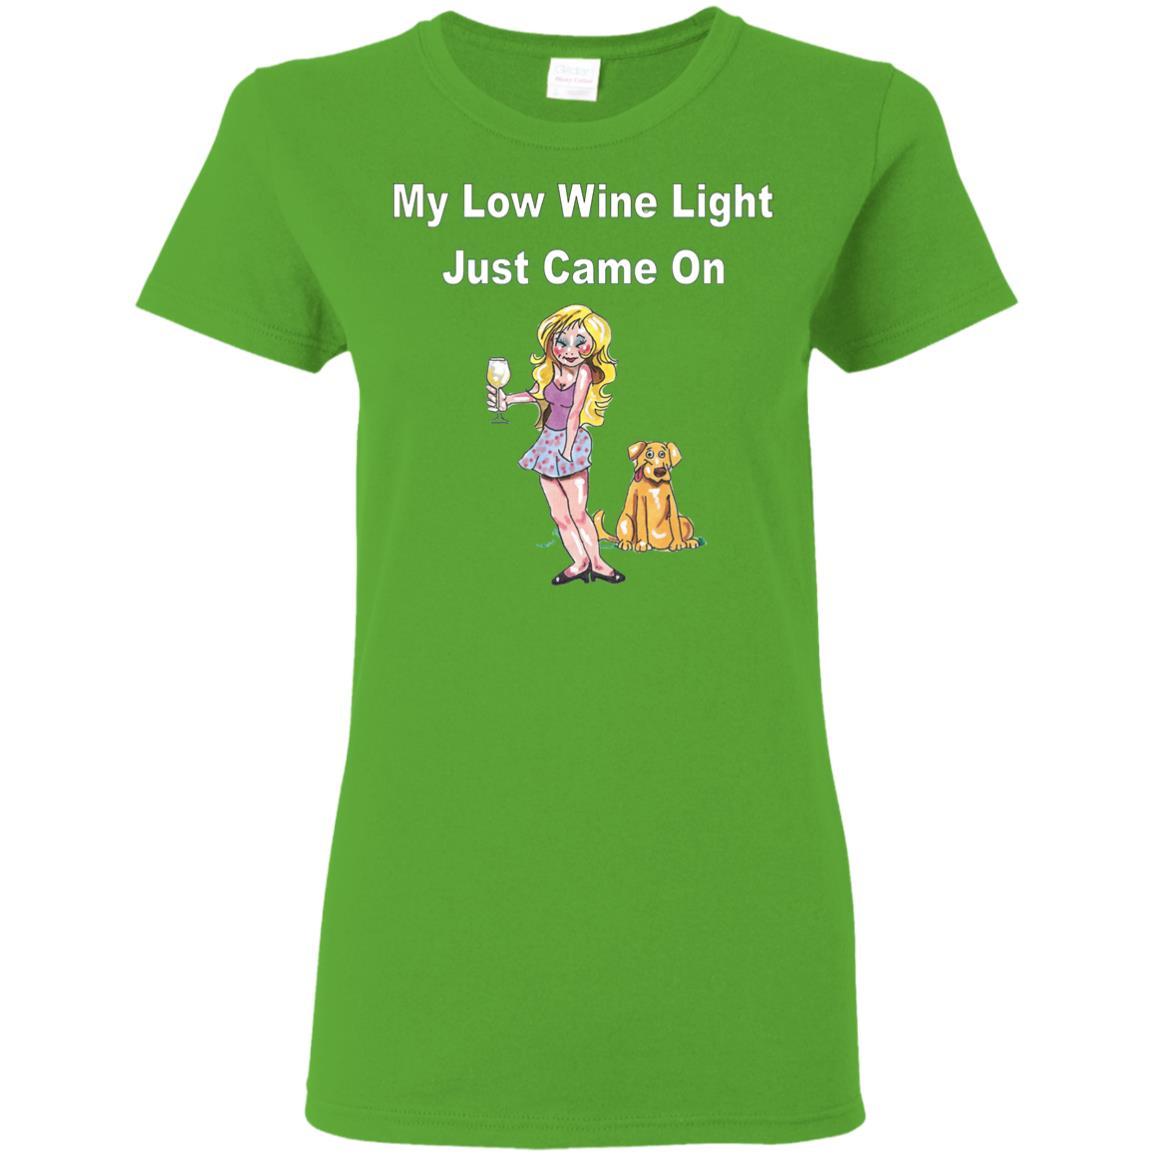 T-Shirts Electric Green / S WineyBitches.co 'Low Wine Light" Ladies' 5.3 oz. T-Shirt WineyBitchesCo